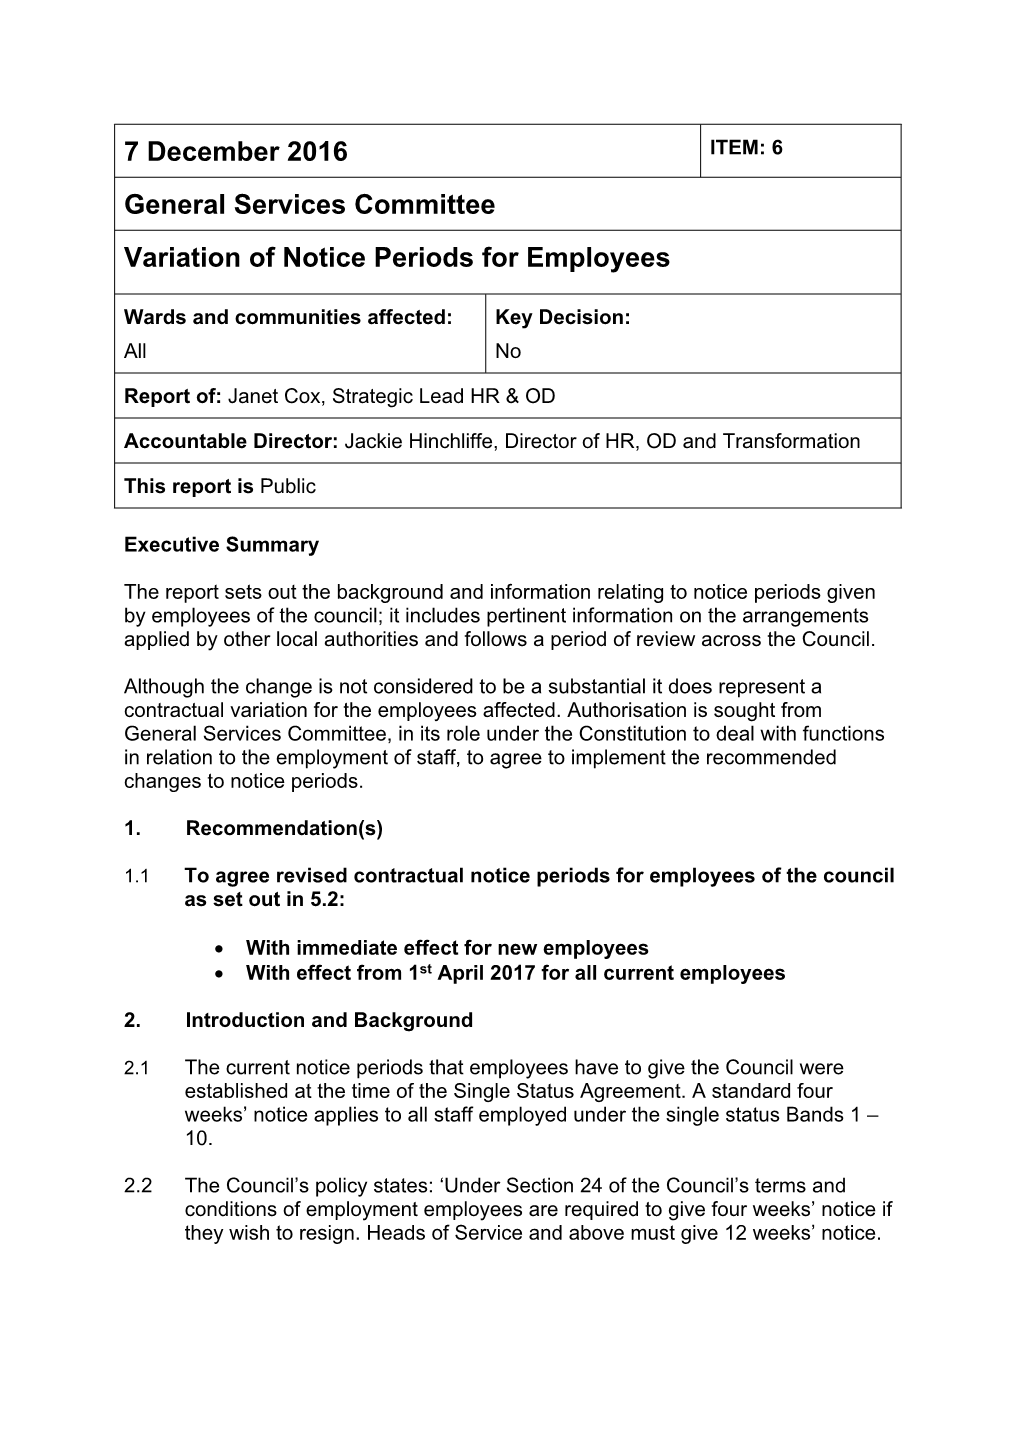 General Services Committee Variation of Notice Periods for Employees